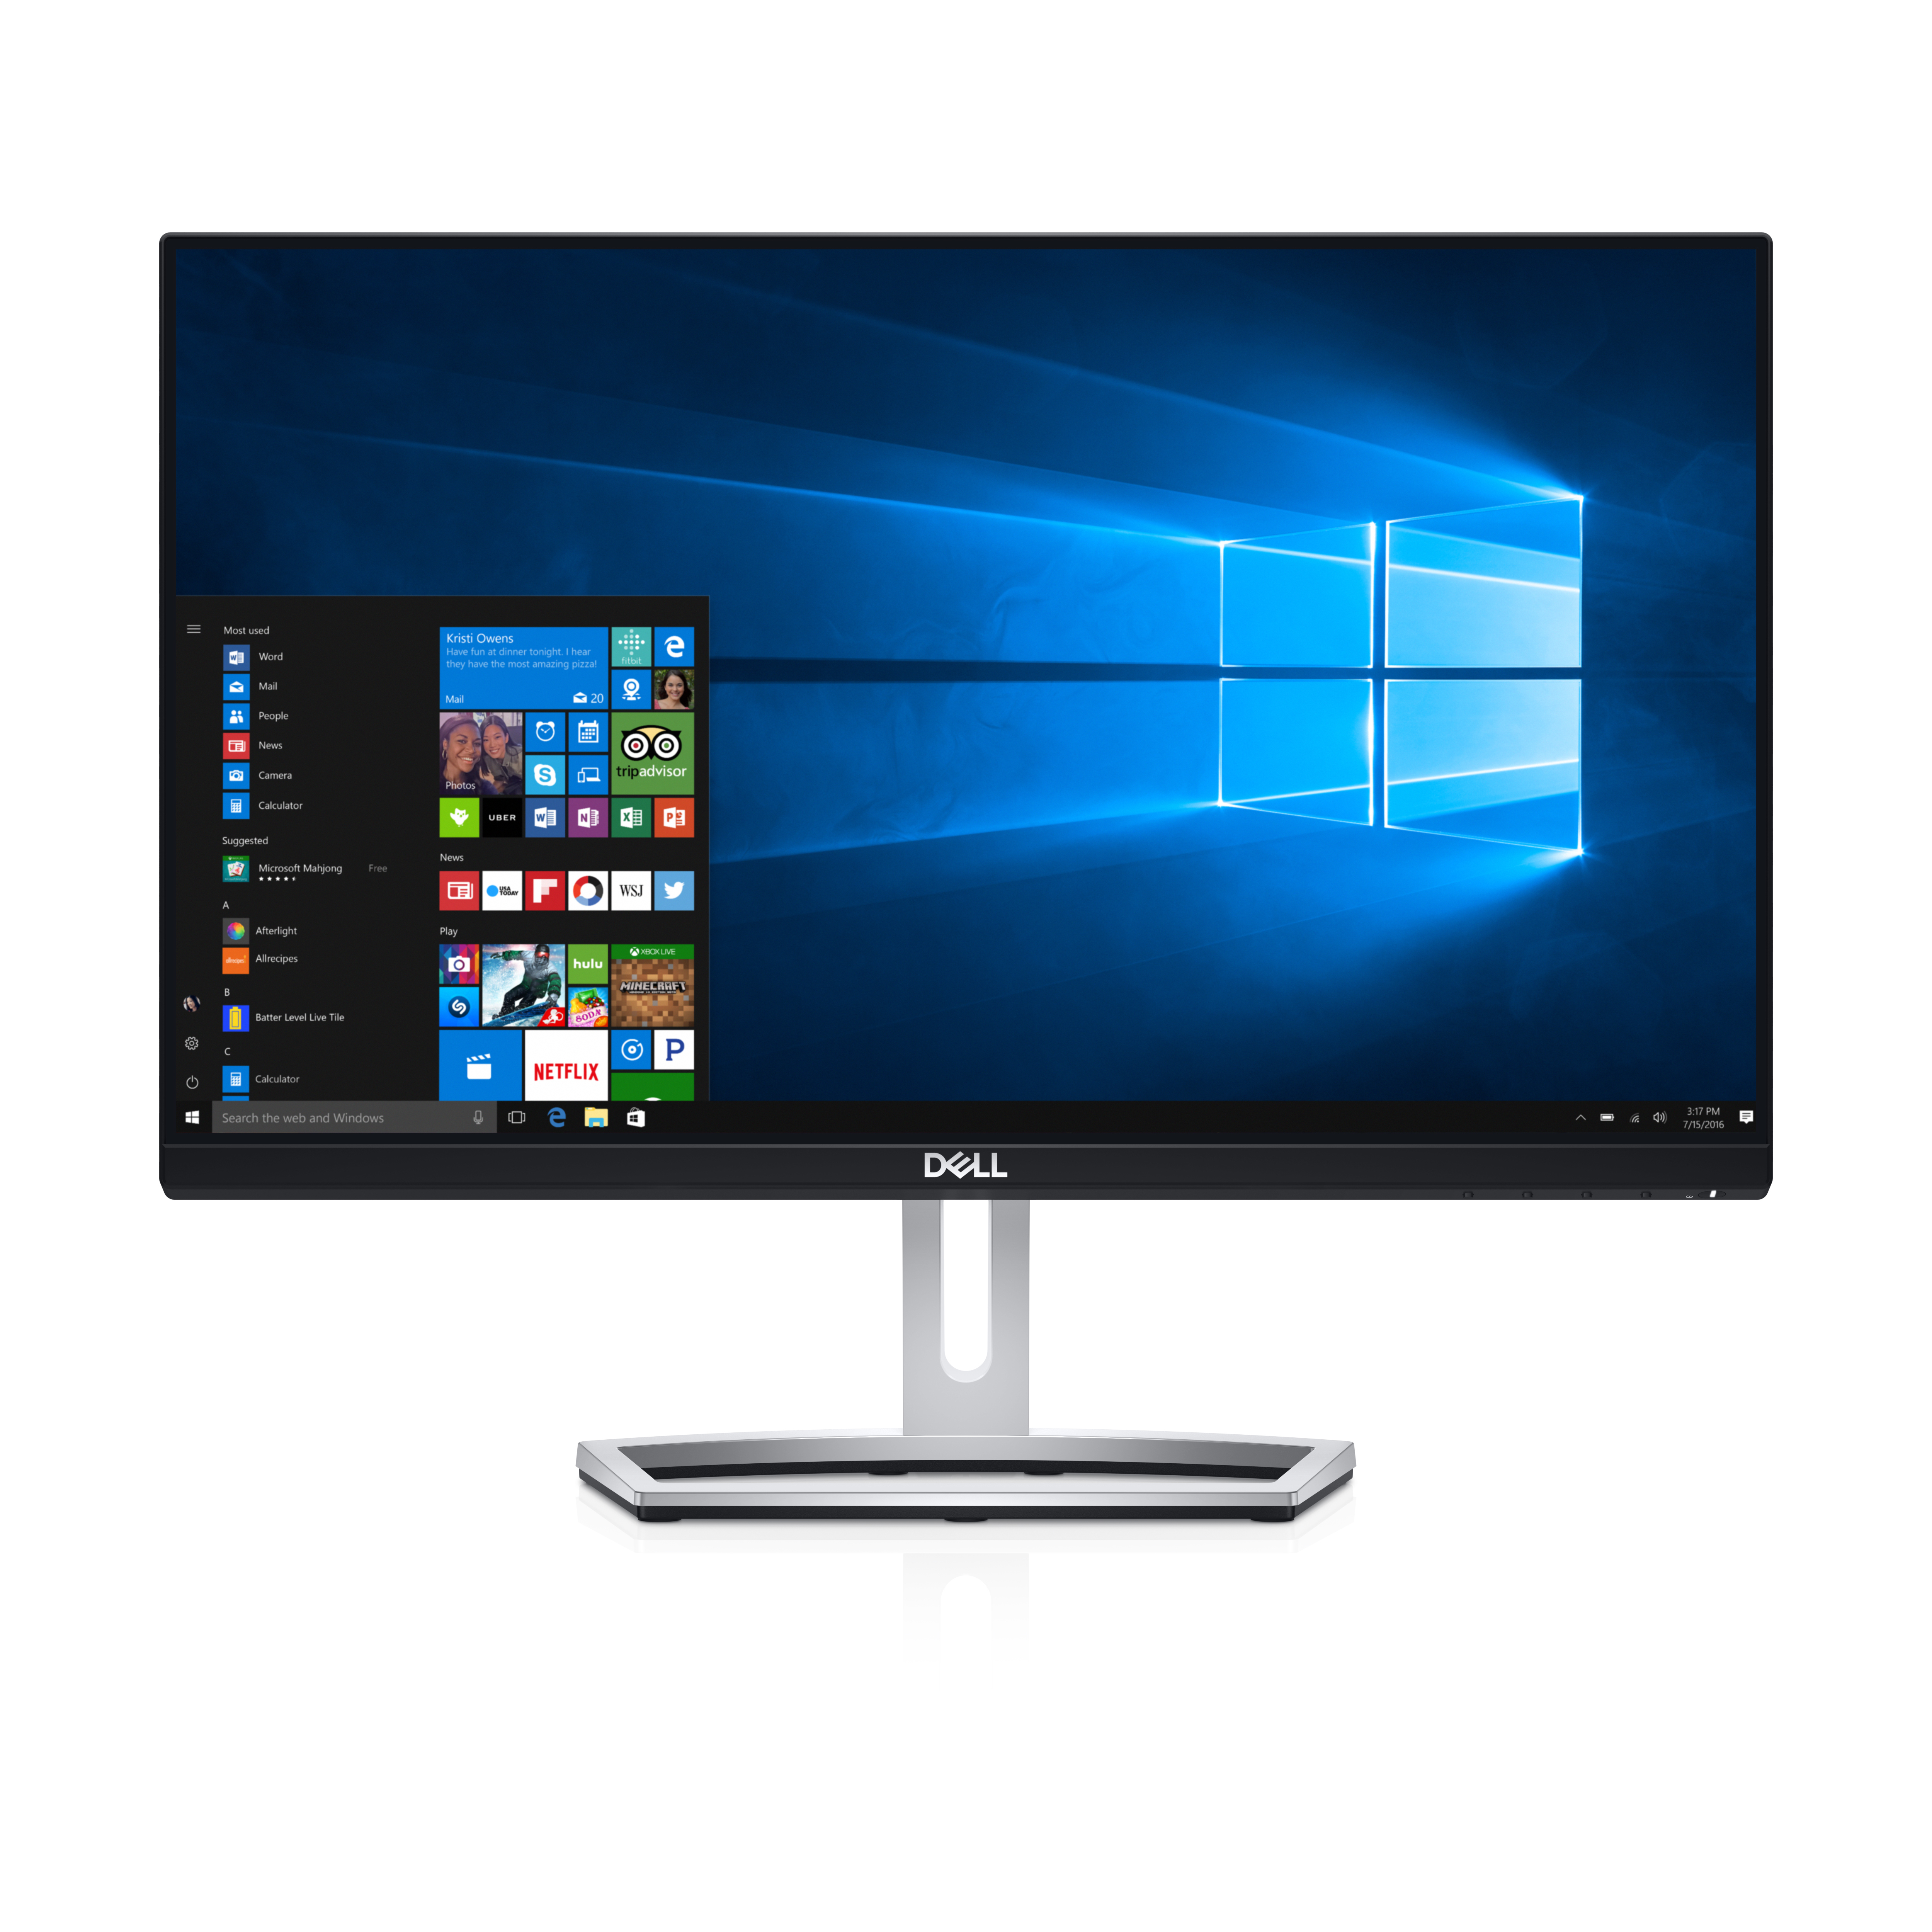 DELL S Series S2218H LED display